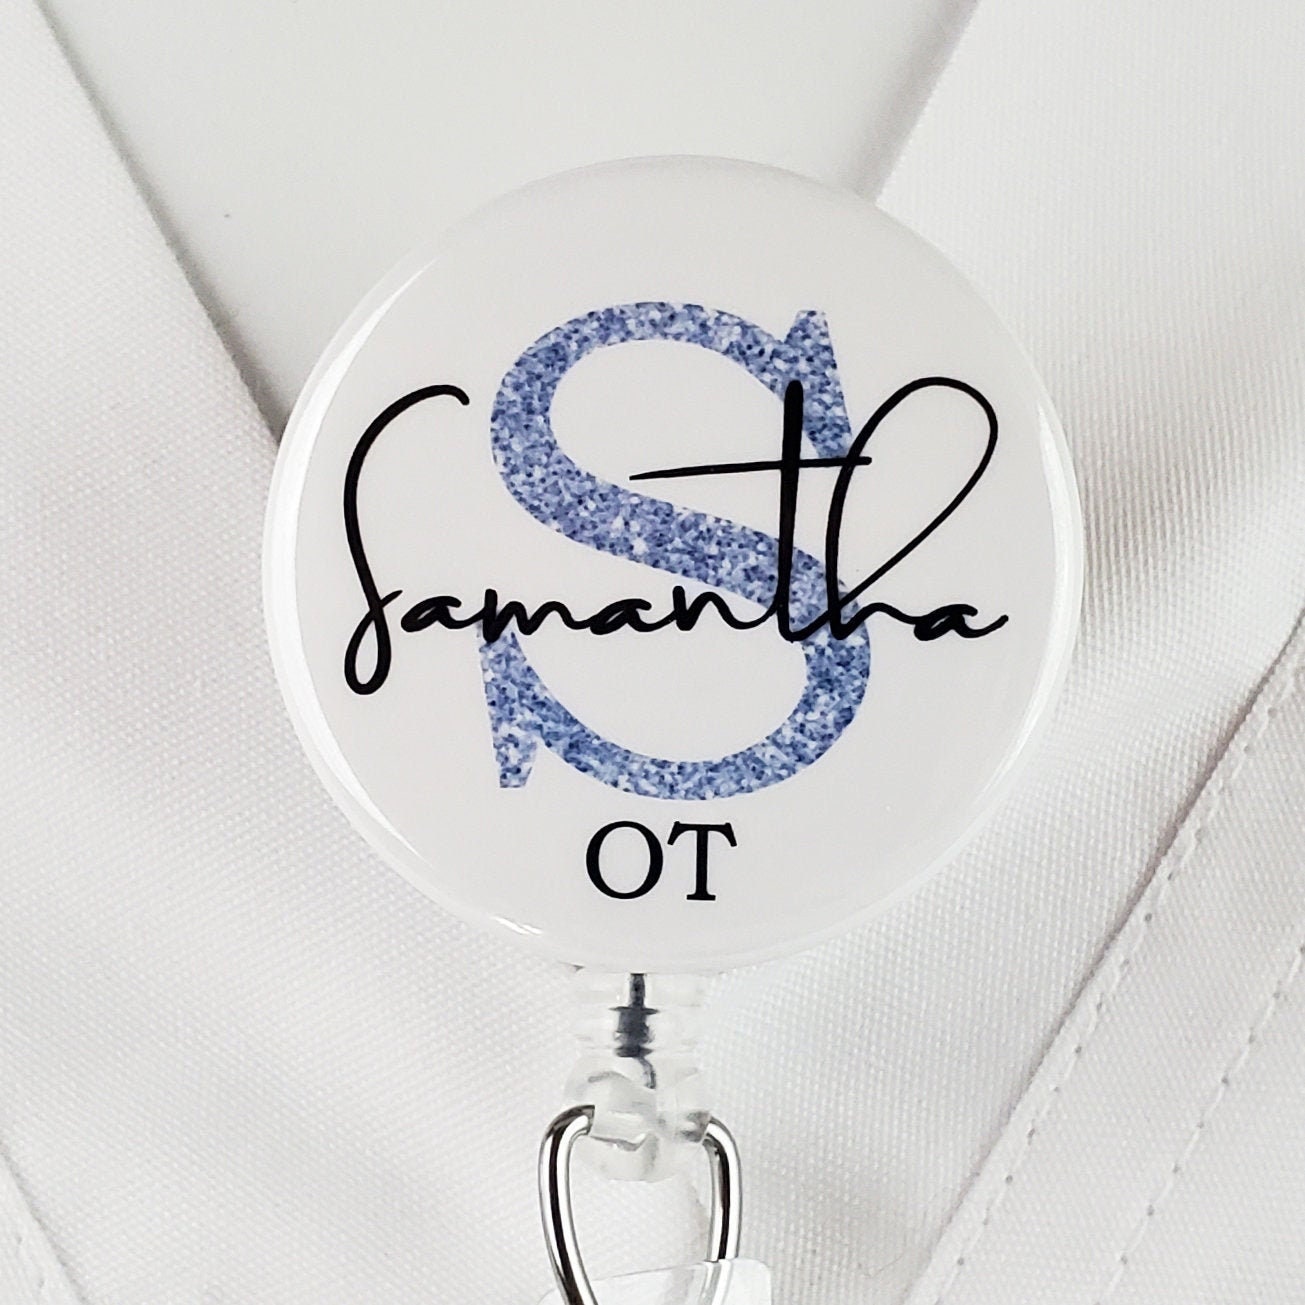 Custom Badge Reel, Personalized Nurse ID Tag, RN LPN Doctor Stethoscope,  Lanyard License Id, Retractable Belt Clip With Credentials 731C 